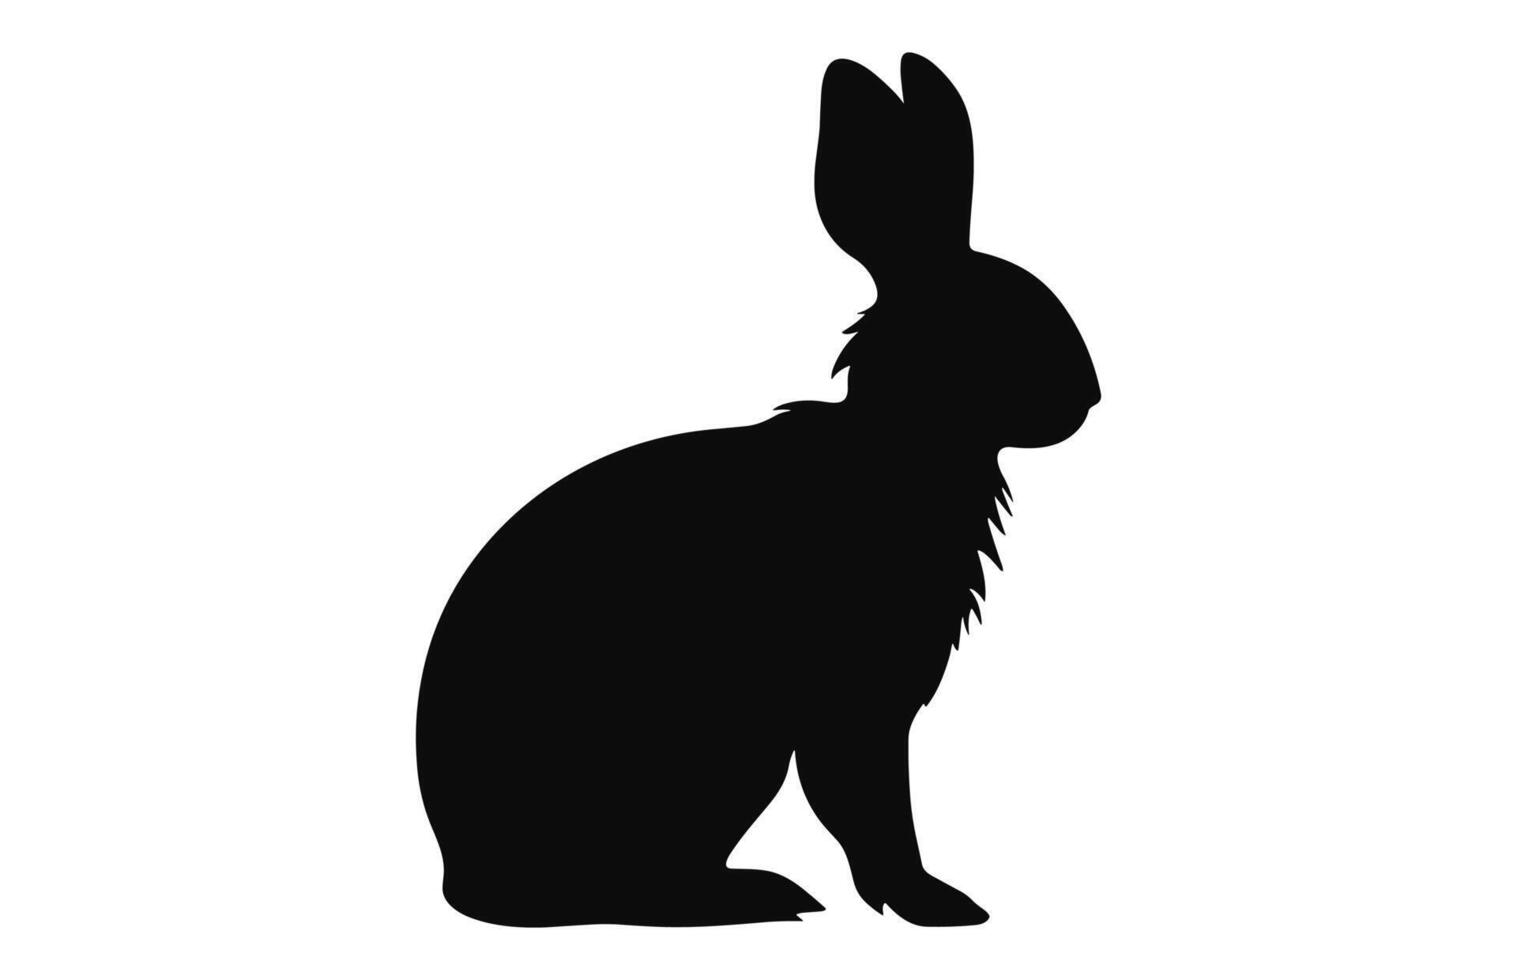 Rabbit vector black silhouette isolated on a white background